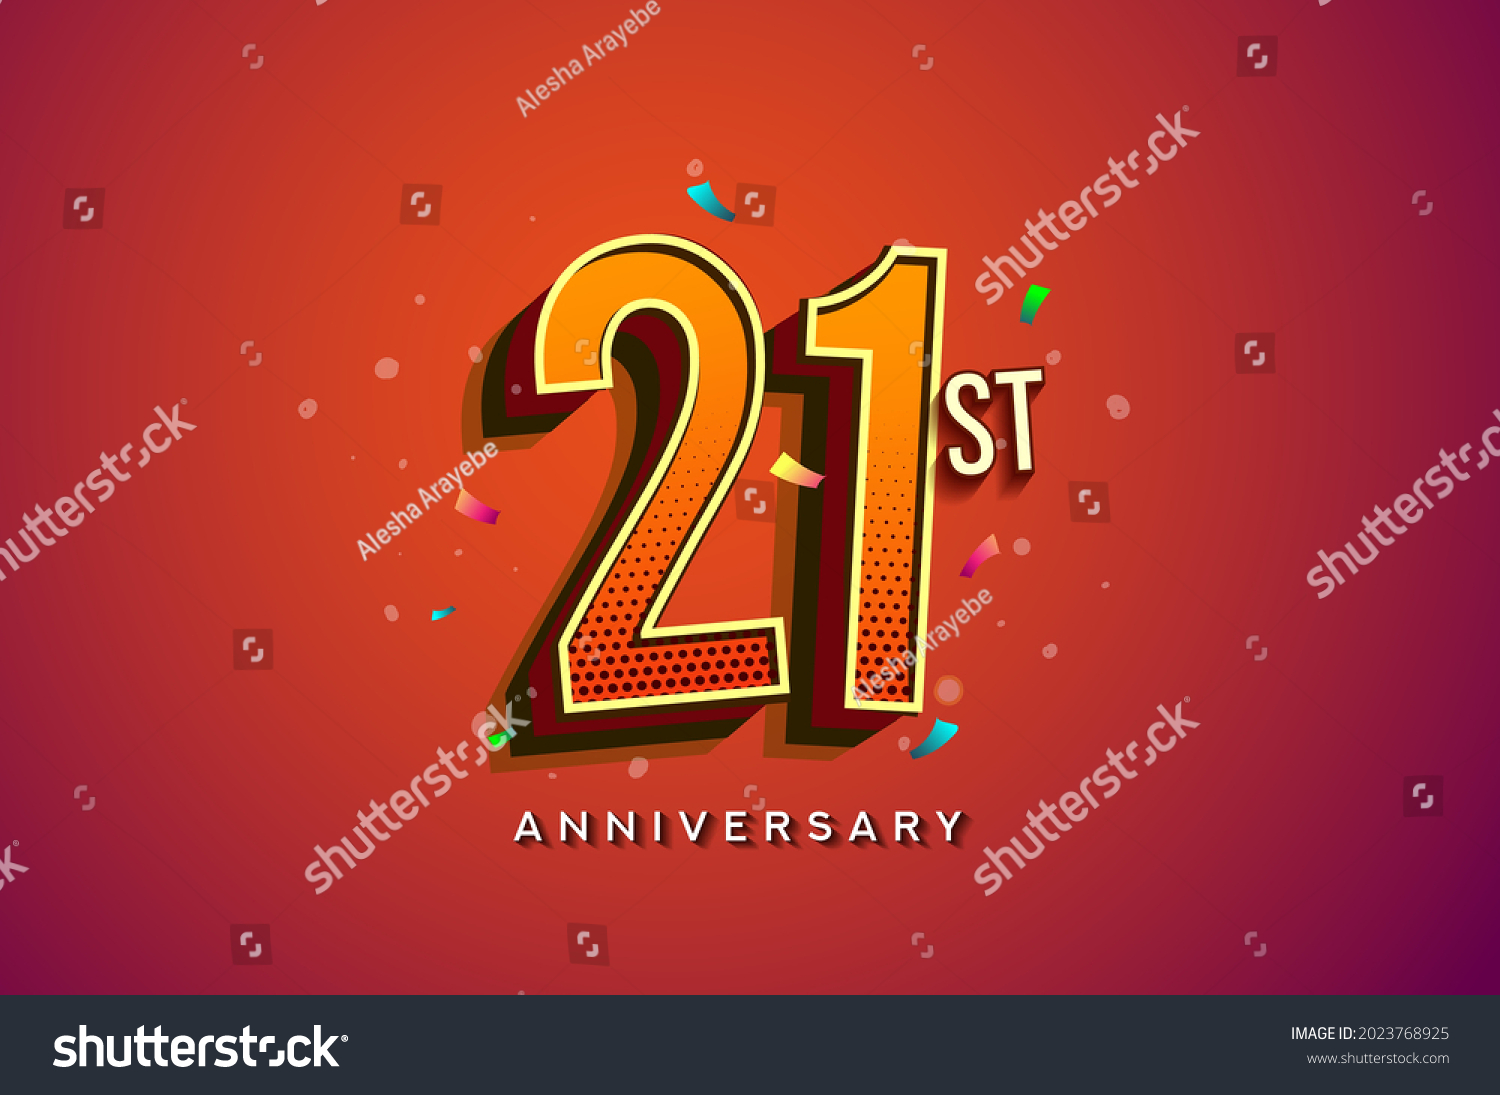 SVG of 21st Anniversary Logo Design With Colorful Confetti, Birthday Greeting card with Colorful design elements for banner and invitation card of anniversary celebration. svg